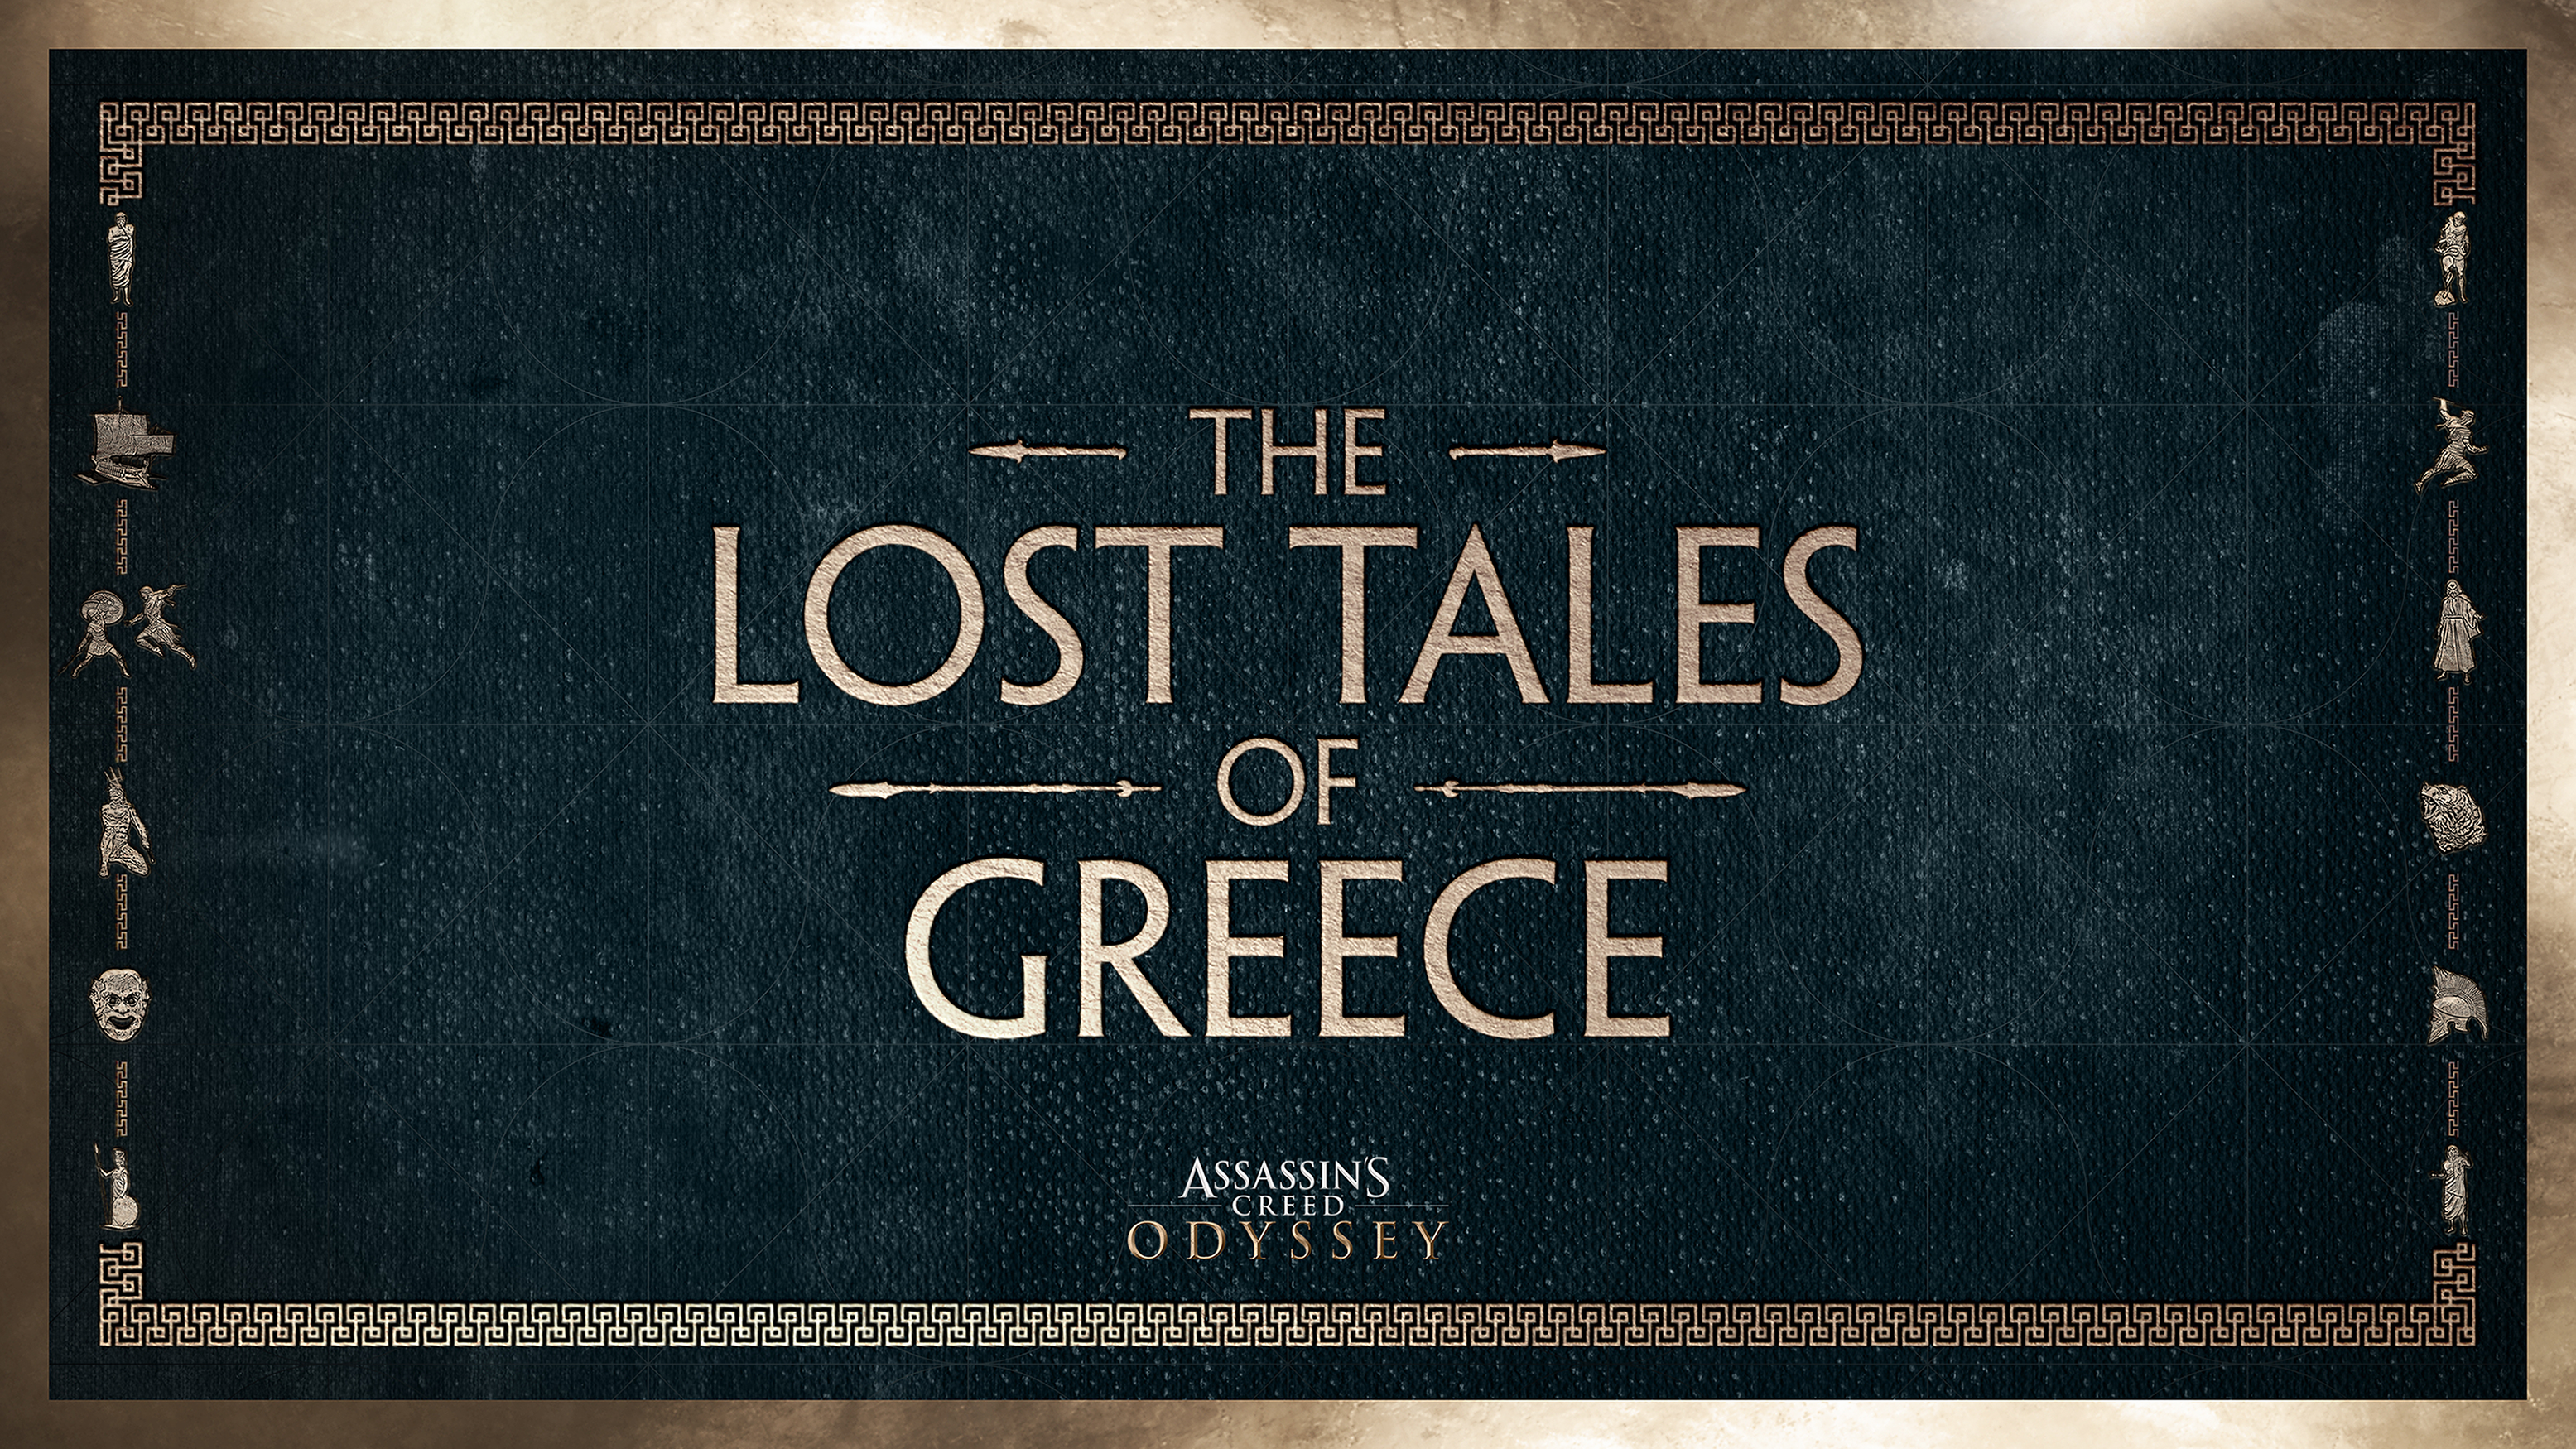 spids mor chap The Lost Tales of Greece | Assassin's Creed Wiki | Fandom